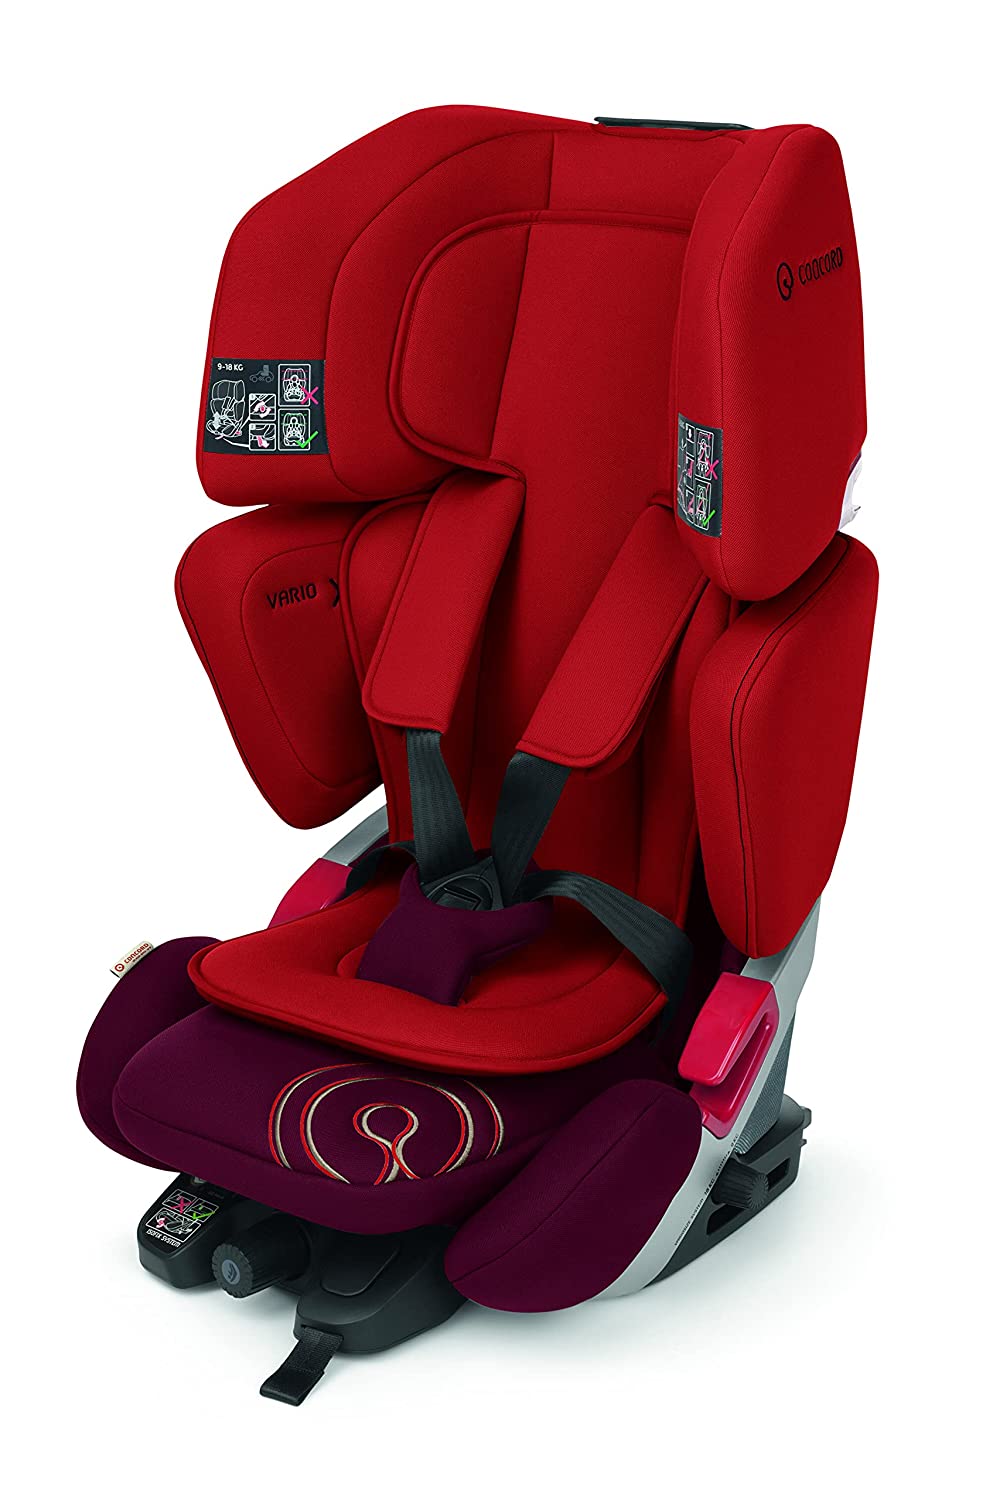 Concord VARI0988 Vario XT-5 Child Seat Group 1 2 3, from 9 to 36 kg, Isofix and Top Tether, Red